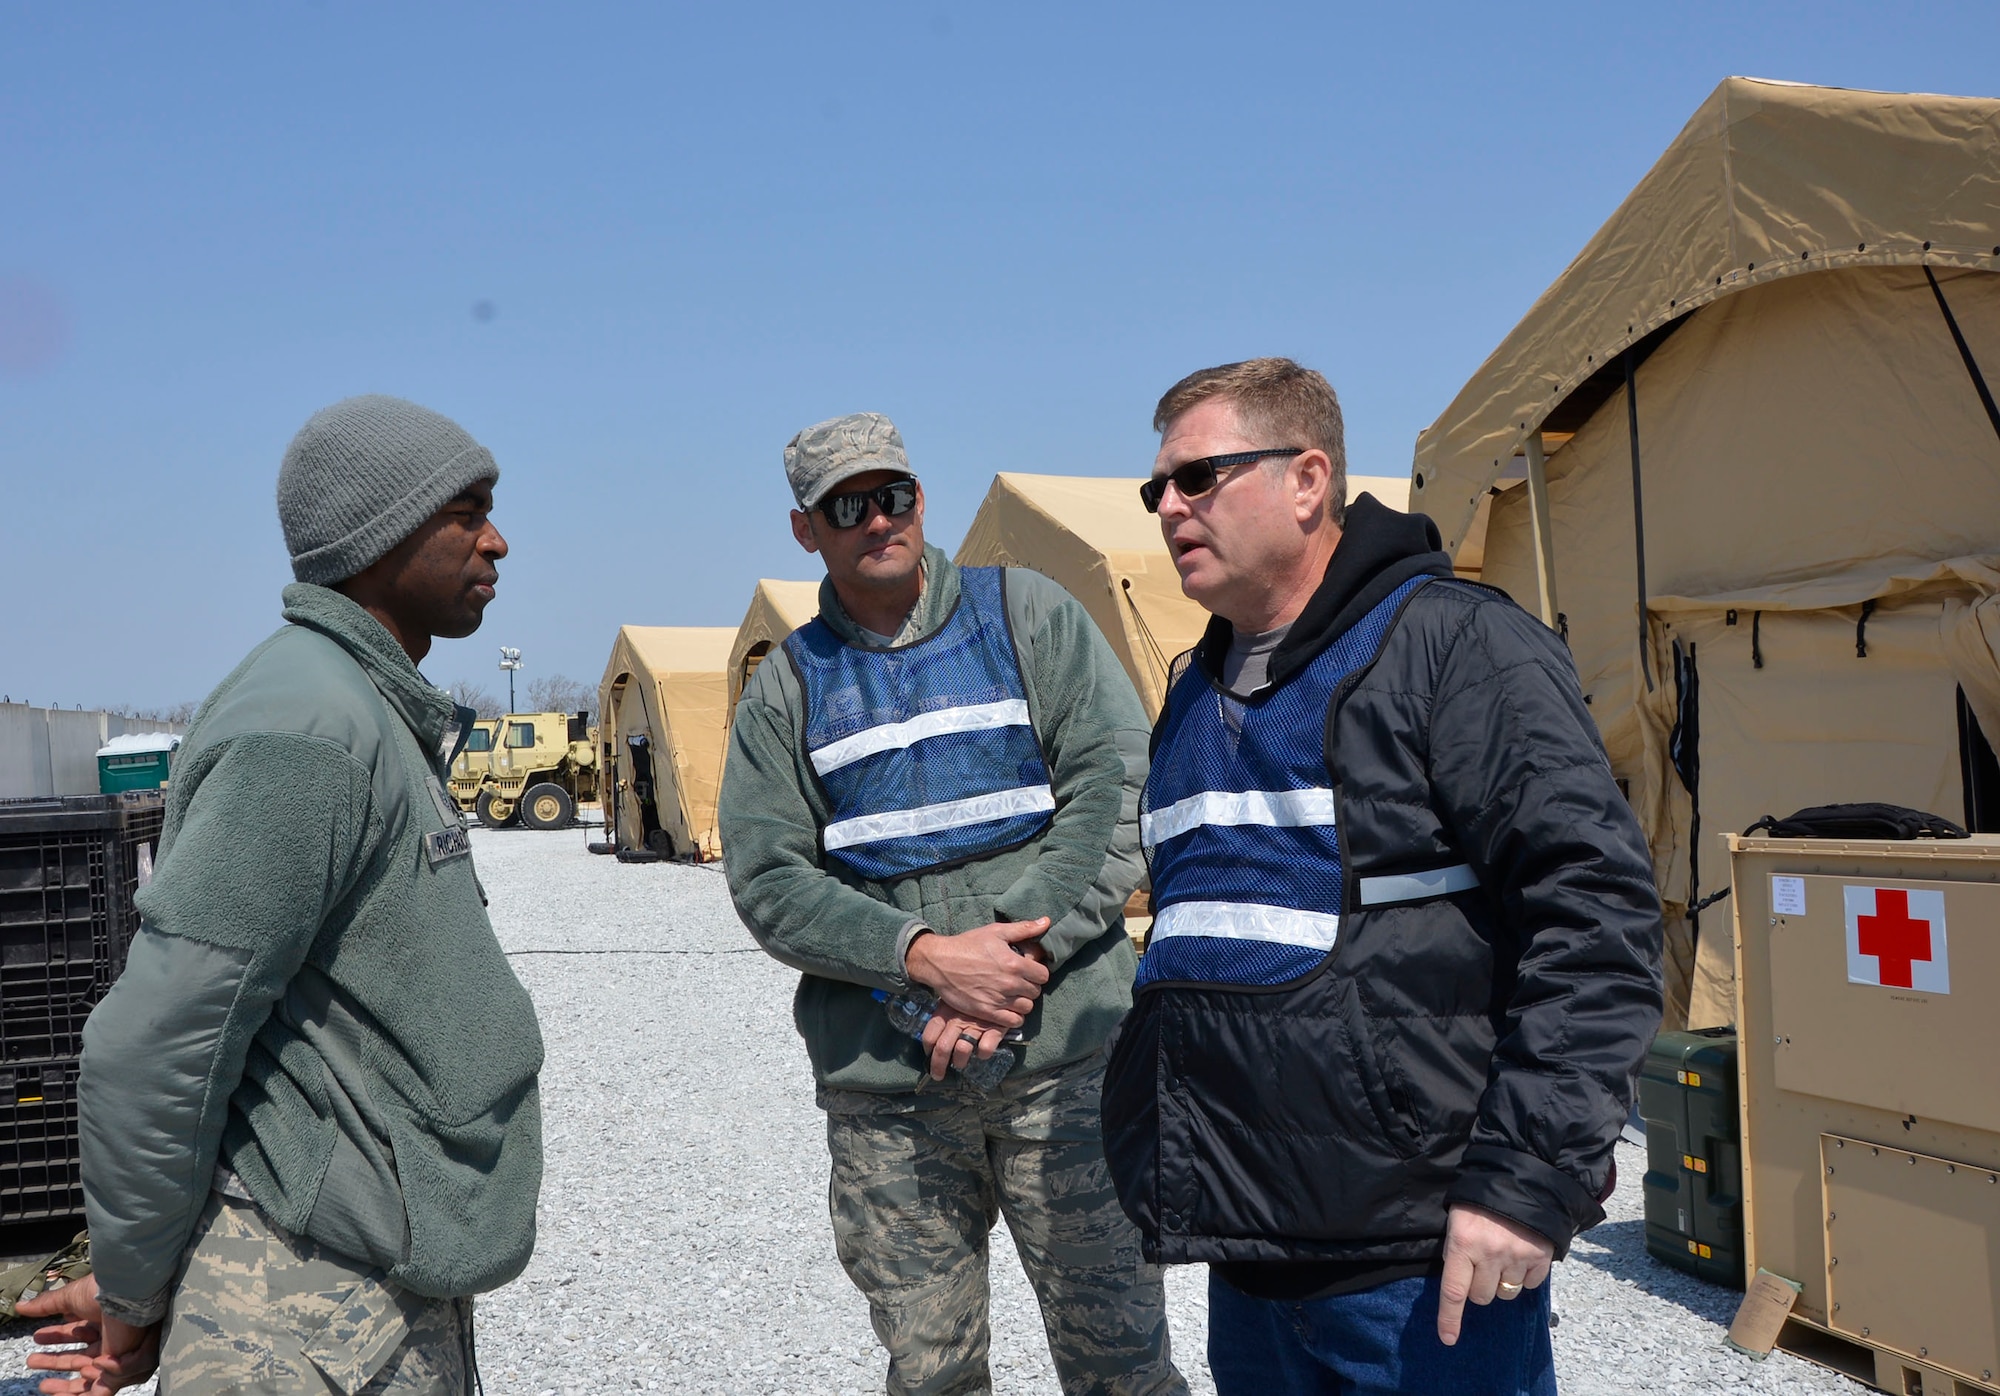 Jeff Brandenburg, chief, Air Forces Northern Medical Plans and Logistics, talks with Tech. Sgt. Quentin Richardson, 81st Medical Group Medical Support Squadron logistics, during the Expeditionary Medical Support field confirmation exercise here April 18. The confirmation exercise is evaluating the tactics, techniques and procedures of EMEDS operations during a domestic U.S. contingency such as a natural disaster. (Air Force photo by Mary McHale)